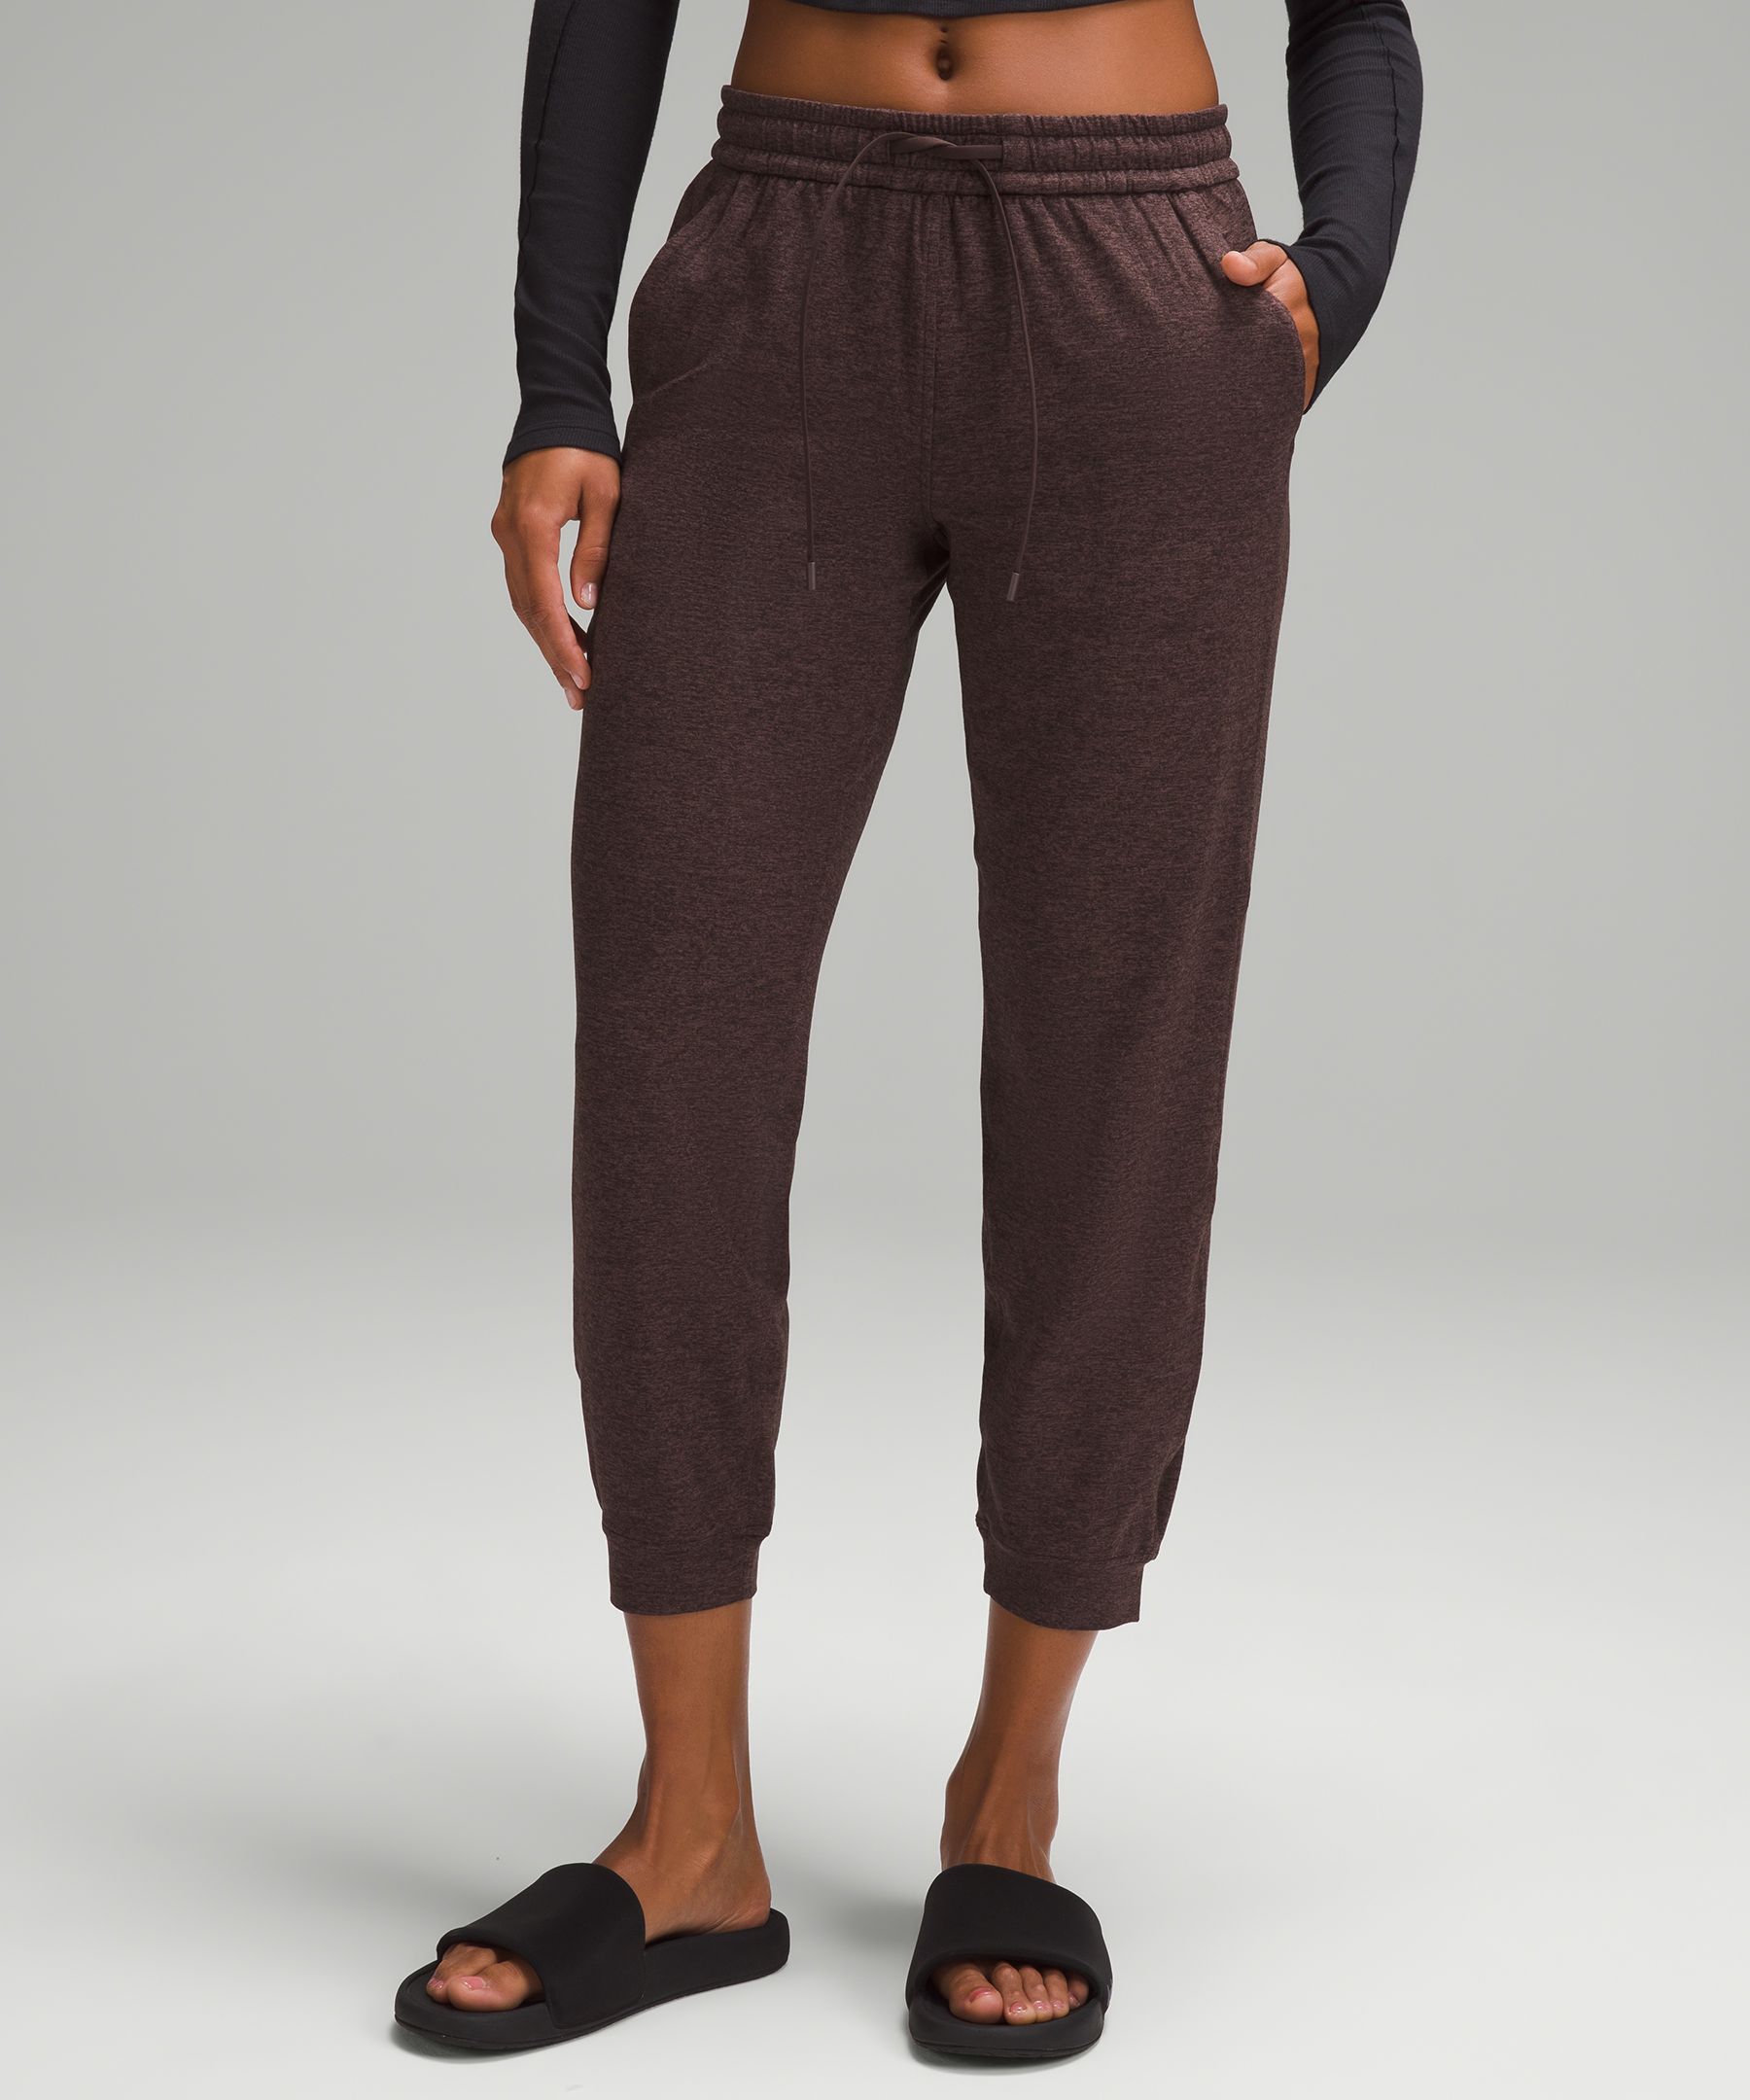 Lululemon athletica Soft Jersey Classic-Fit Mid-Rise Jogger, Women's  Joggers